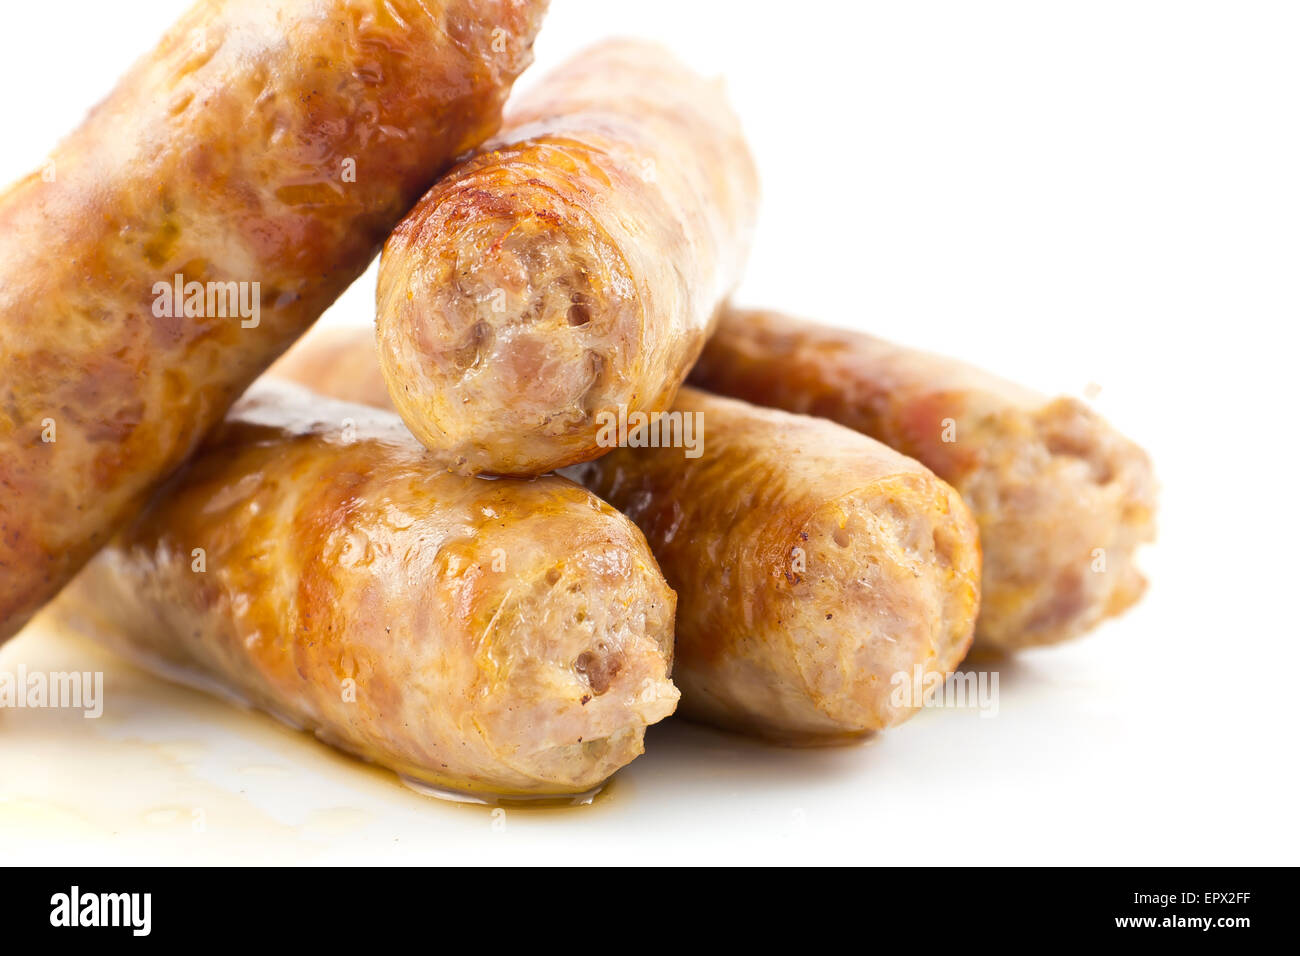 Cooked fried Italian sausage links isolated on white Stock Photo